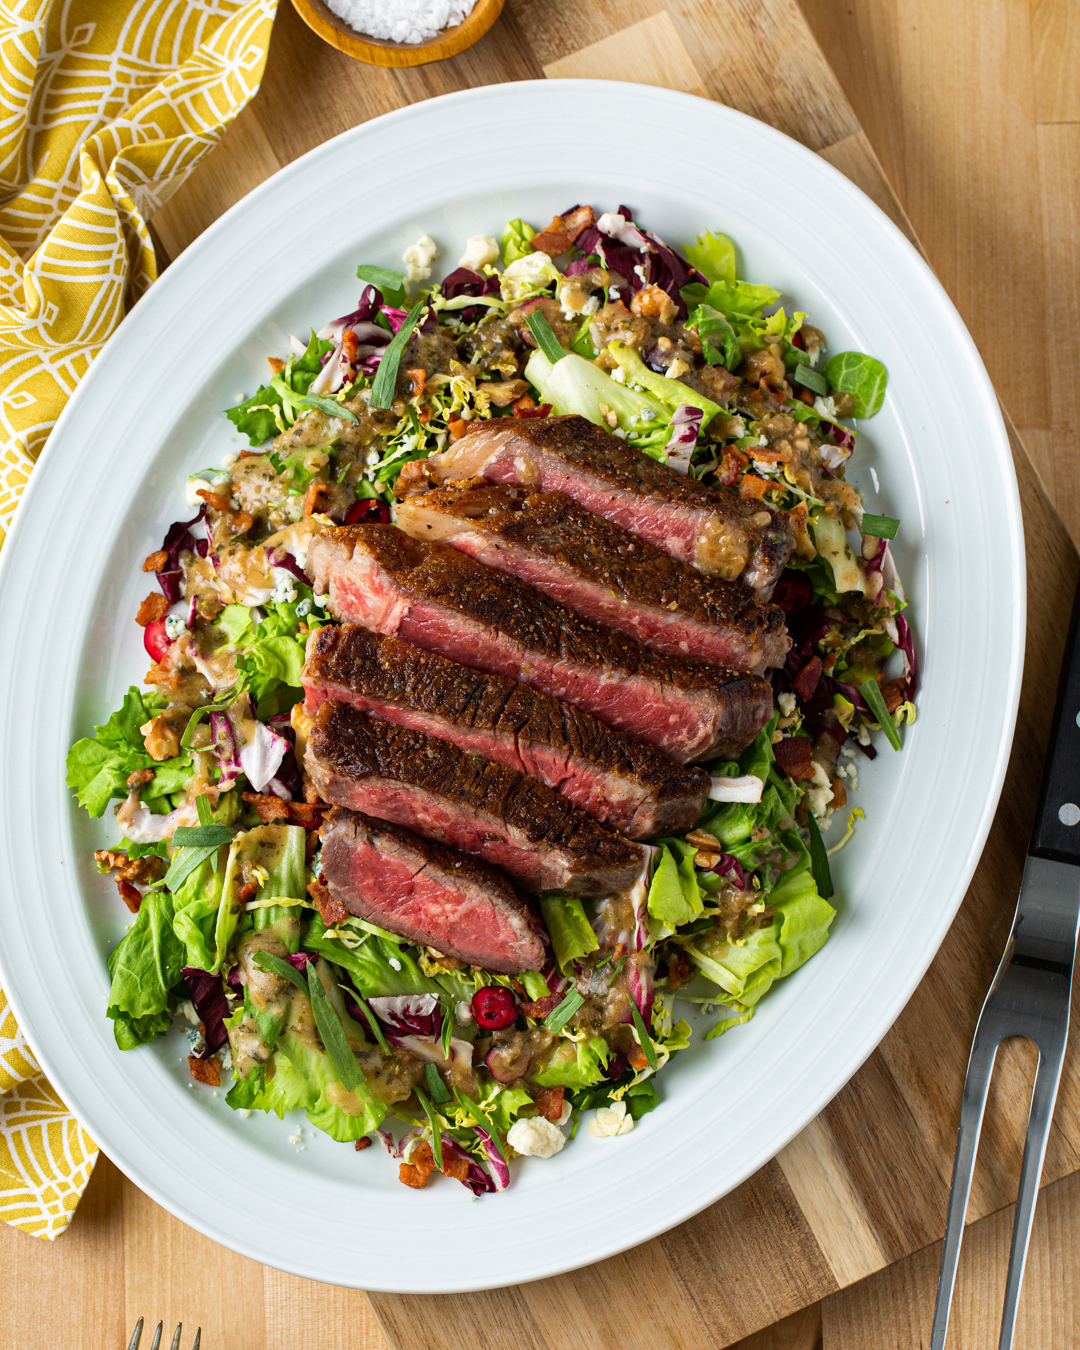 Grilled Steak Salad with Chile & Brown Sugar